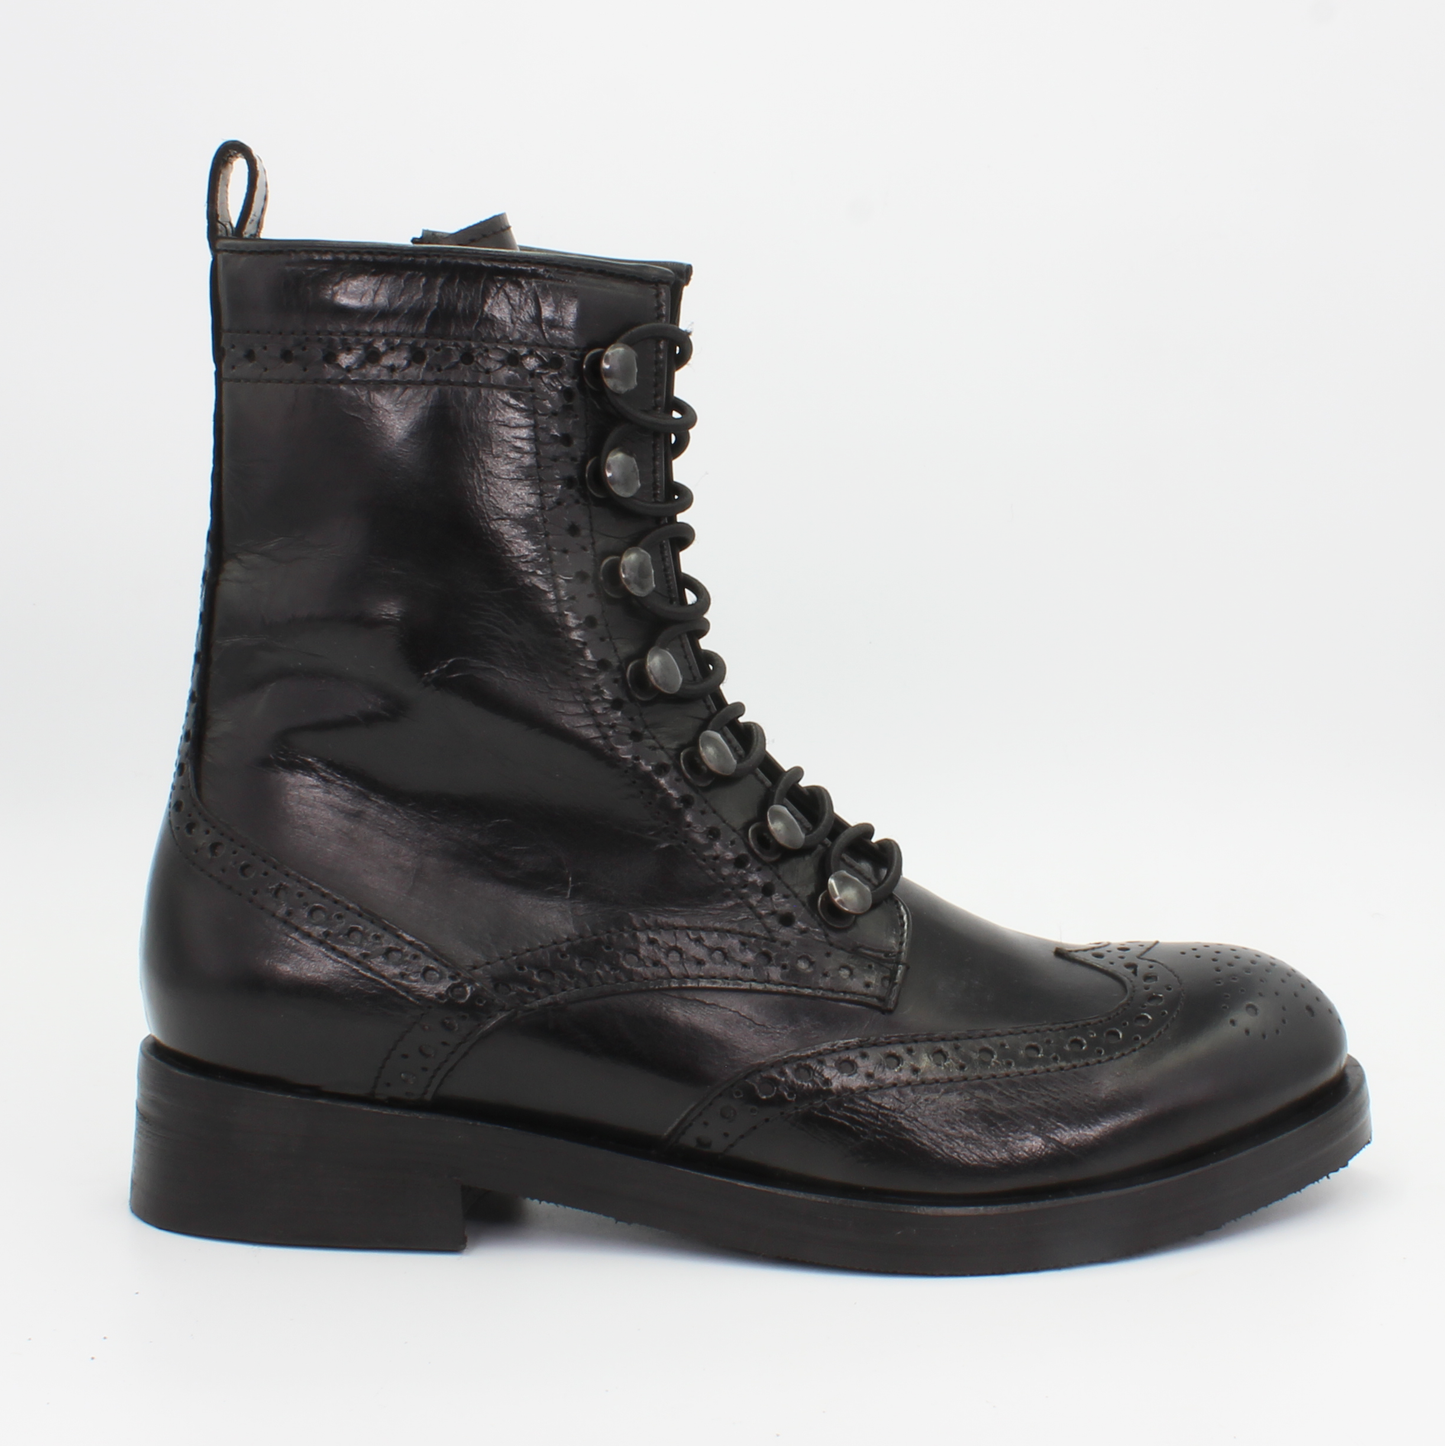 Shop Handmade Italian Leather Lace-up Ankle Boot in Nero (37907/7) or browse our range of hand-made Italian boots for women in leather or suede in-store at Aliverti Durban or Cape Town, or shop online. We deliver in South Africa & offer multiple payment plans as well as accept multiple safe & secure payment methods.